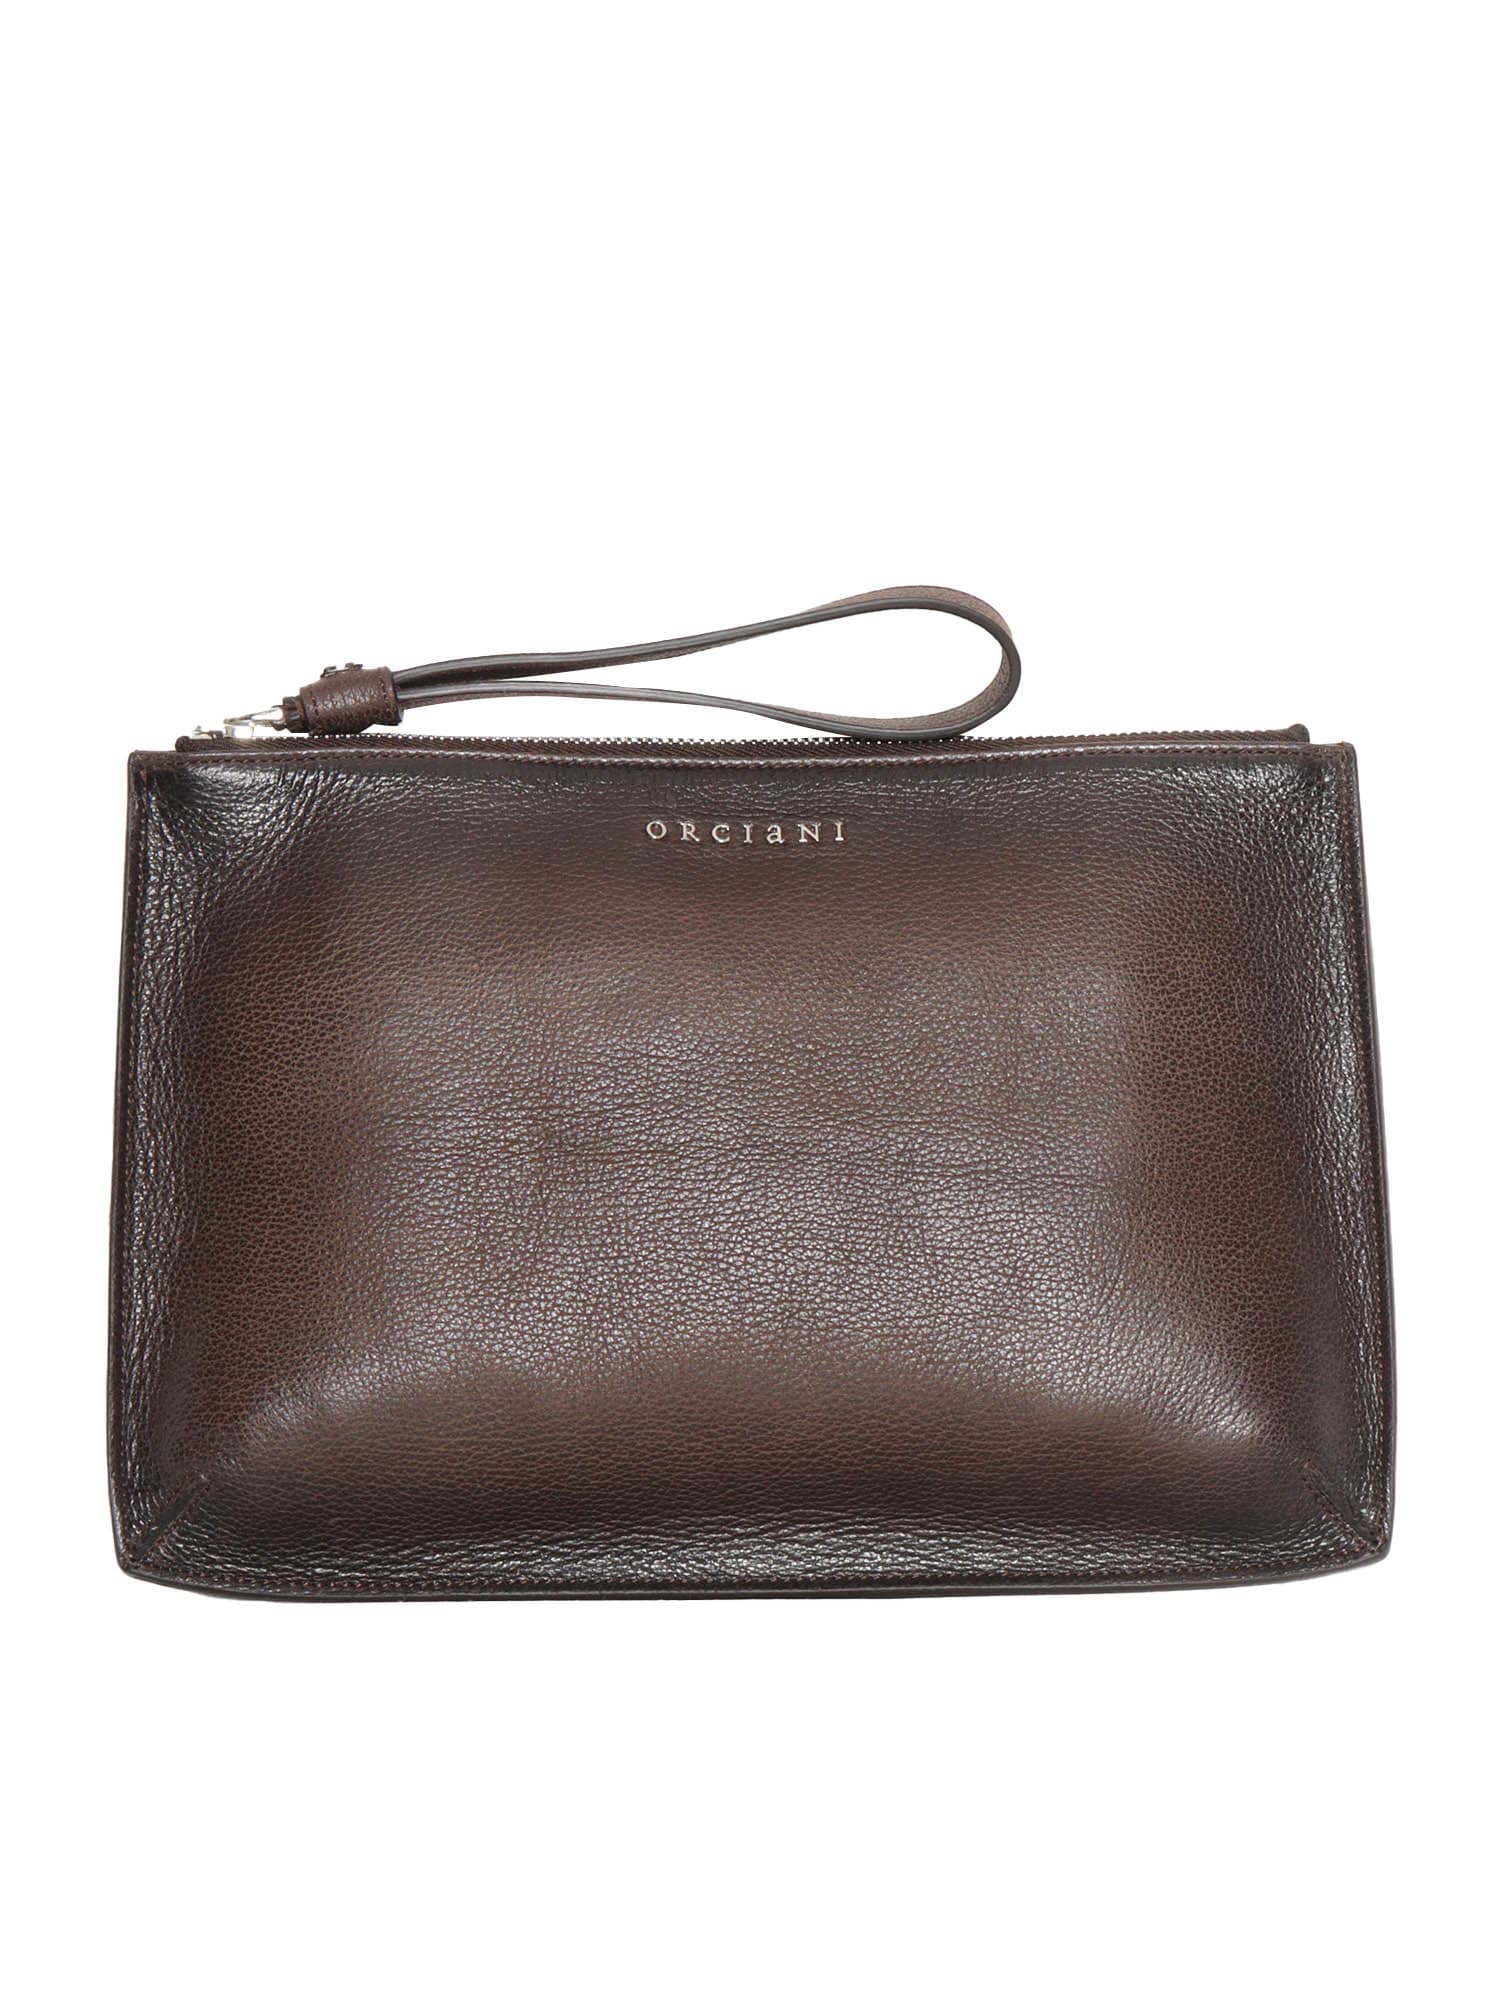 Orciani Chevrette Large Pouch In Brown